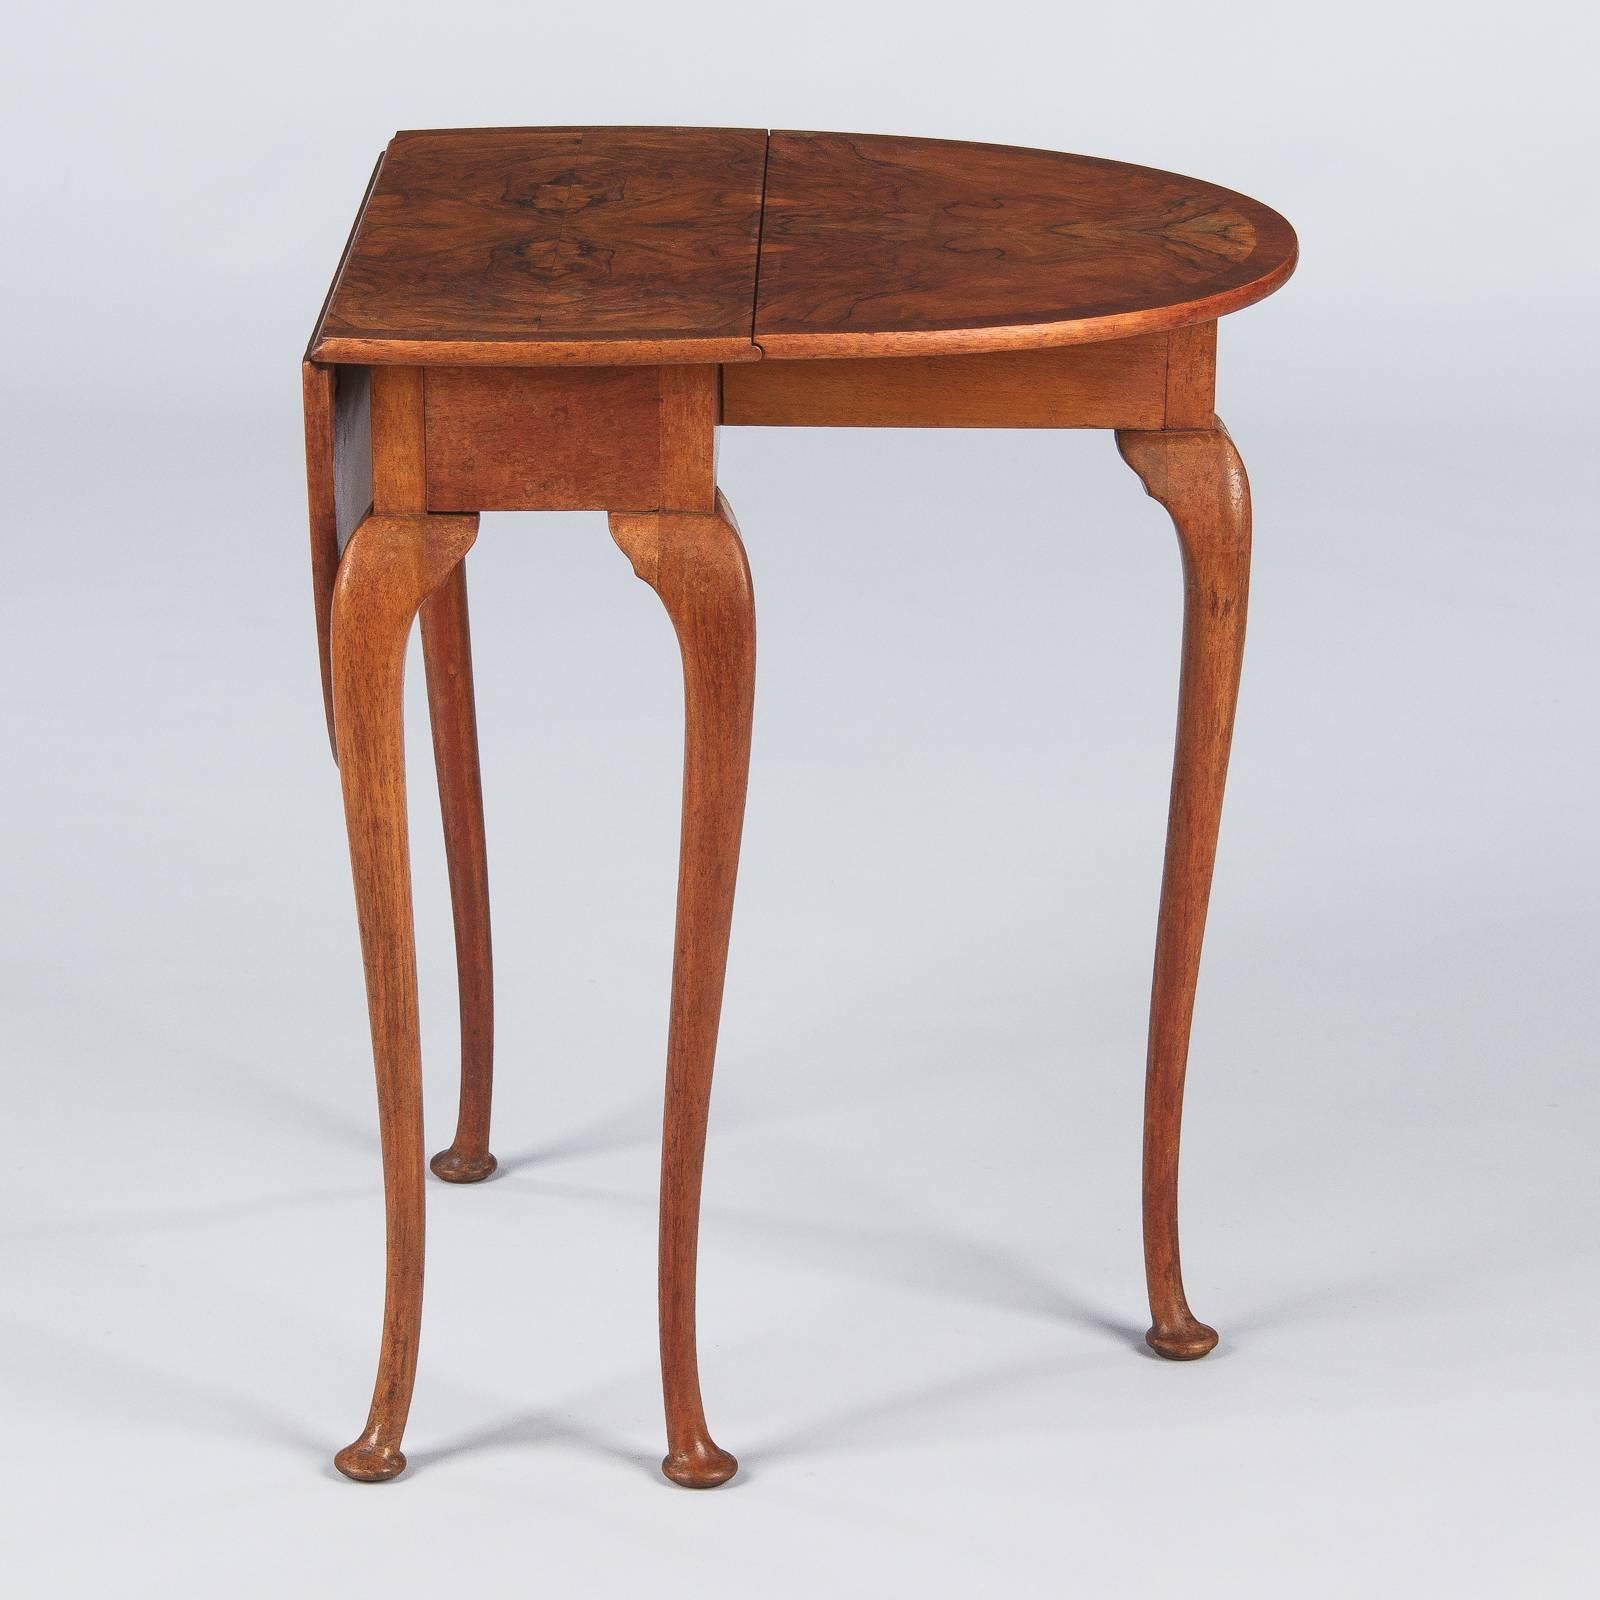 19th Century Queen Anne Style Petite Drop-Leaf Table, England, Late 1800s